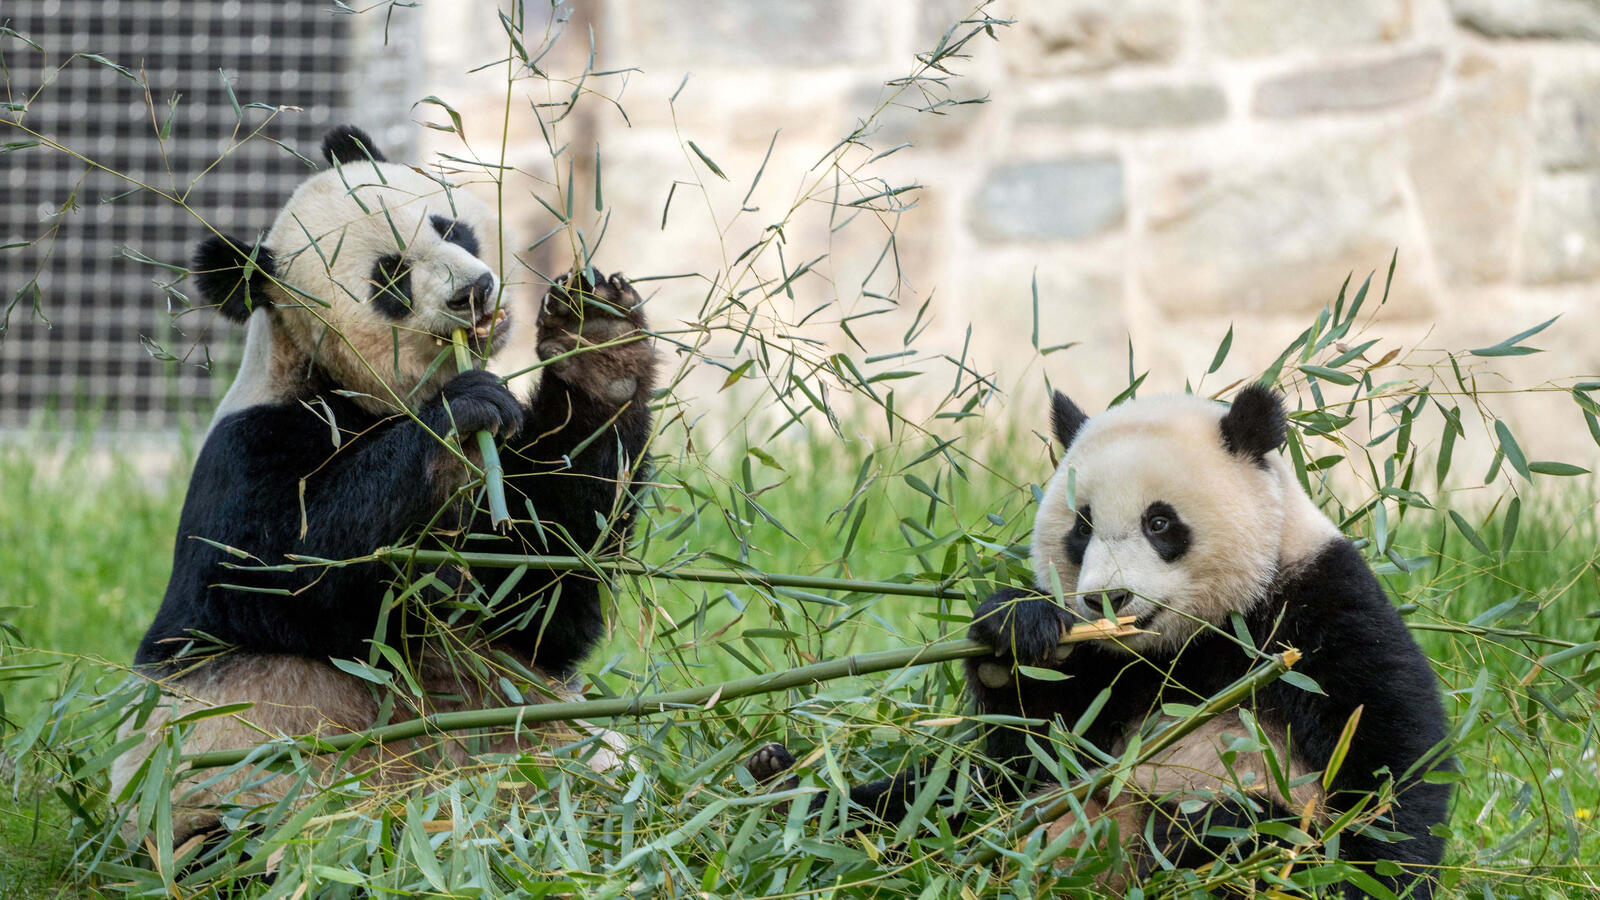 Free photo Two pandas eating leaves off a branch